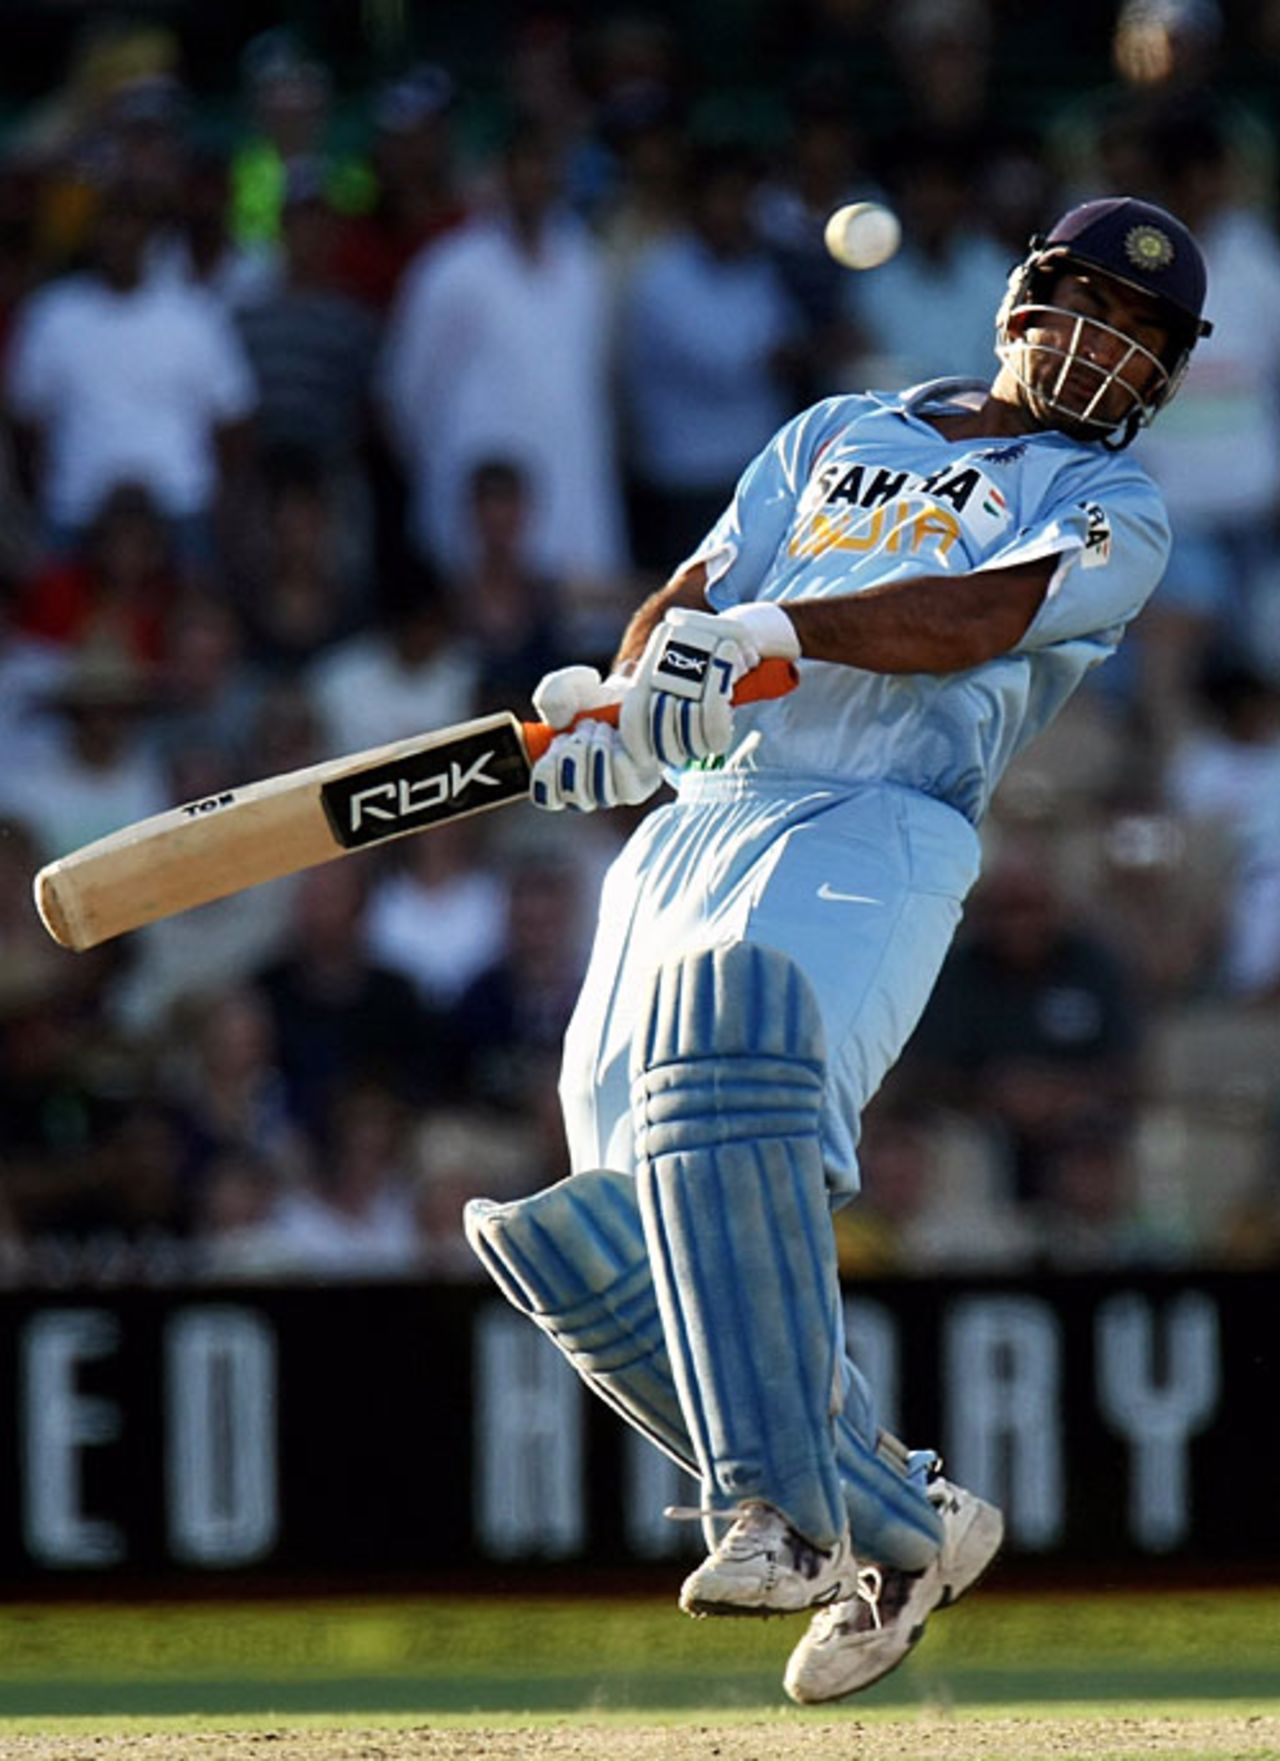 Mahendra Singh Dhoni swerves away from a short ball, Australia v India, 7th match, CB Series, Adelaide, February 17, 2008